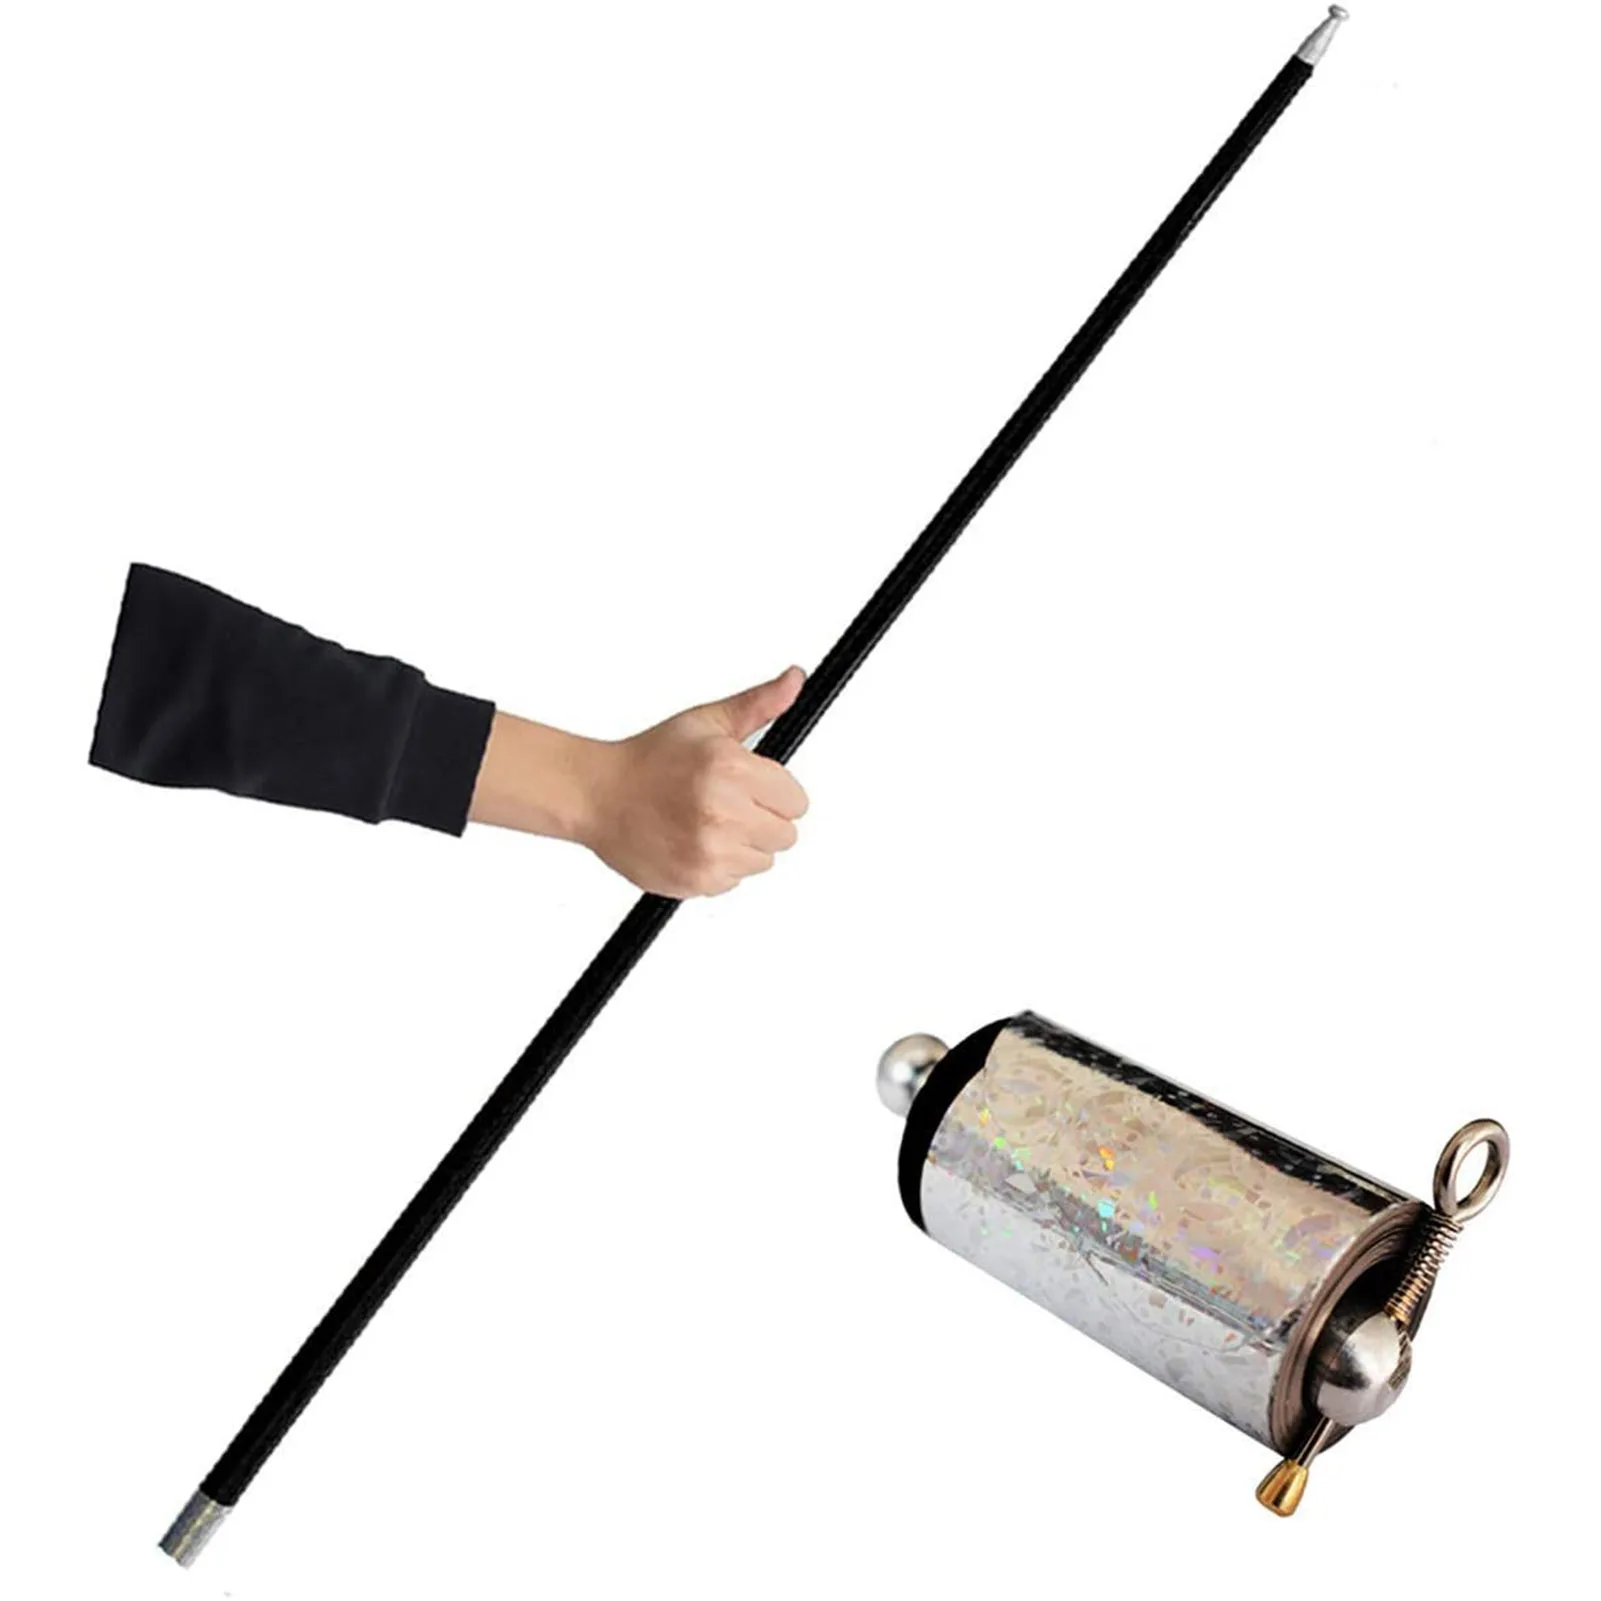 

Plastic Appearing Cane Steel Elastic Rod Magic Tricks Durable Decompression Walking Stick Prop Toy Stretchable Extendable Stick